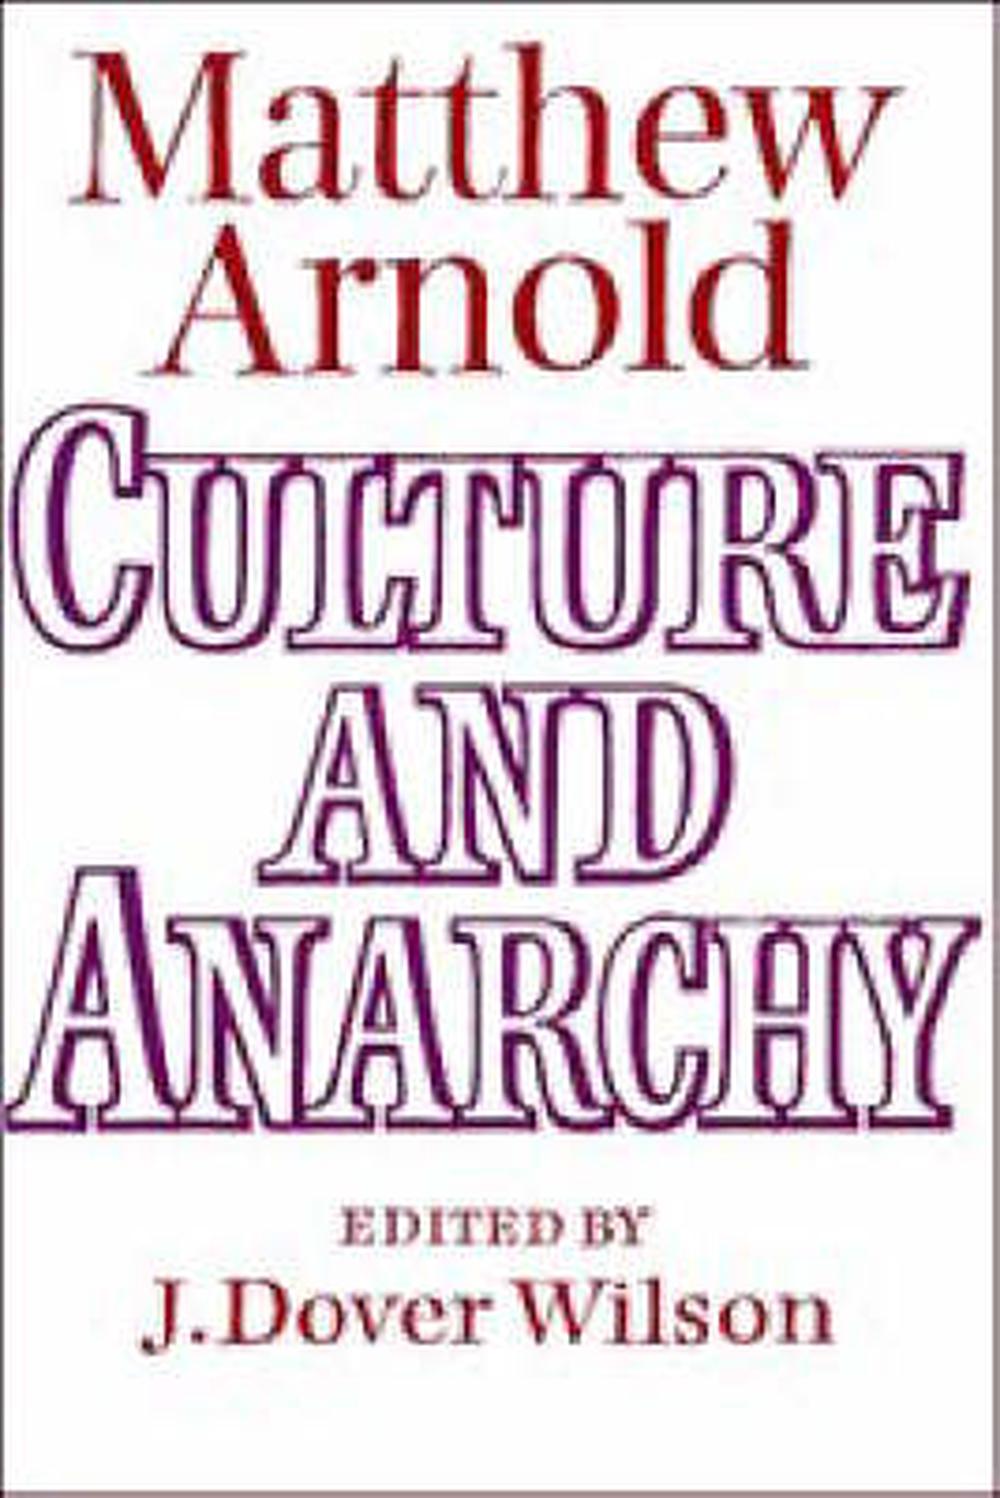 culture and anarchy by matthew arnold